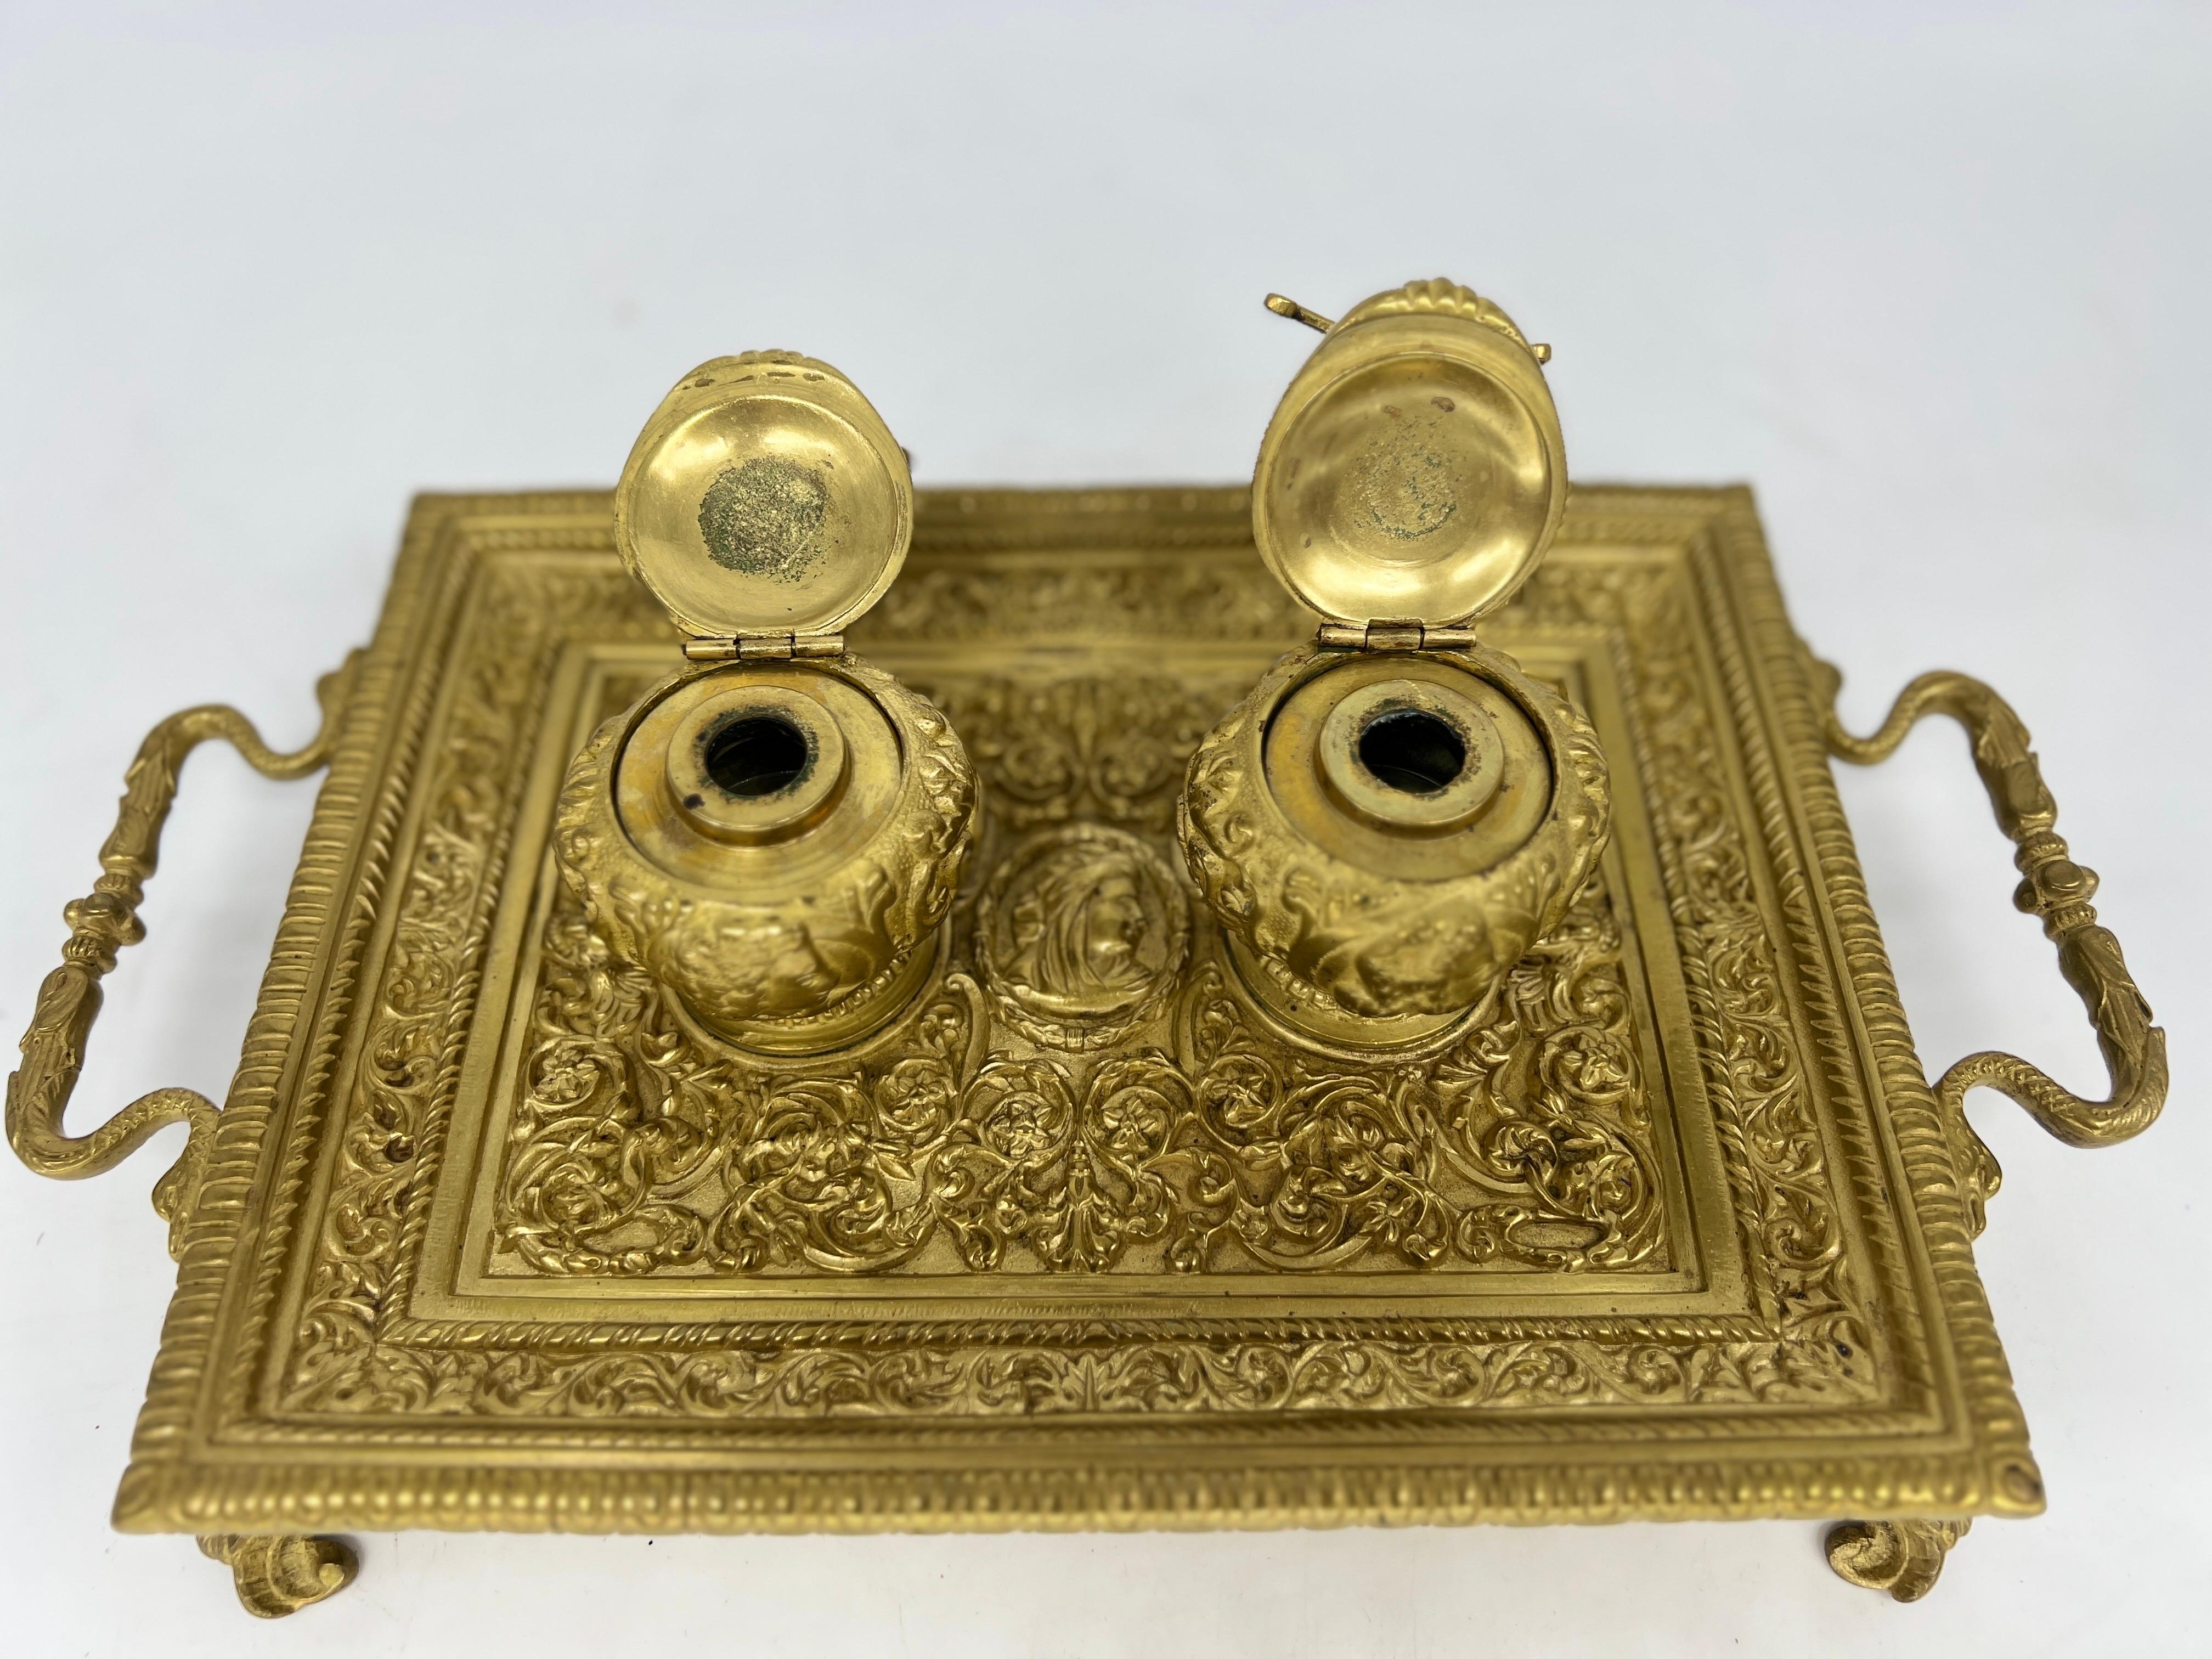 Emancipation Proclamation Inkstand - 19th Century Heavily Chased Brass For Sale 1